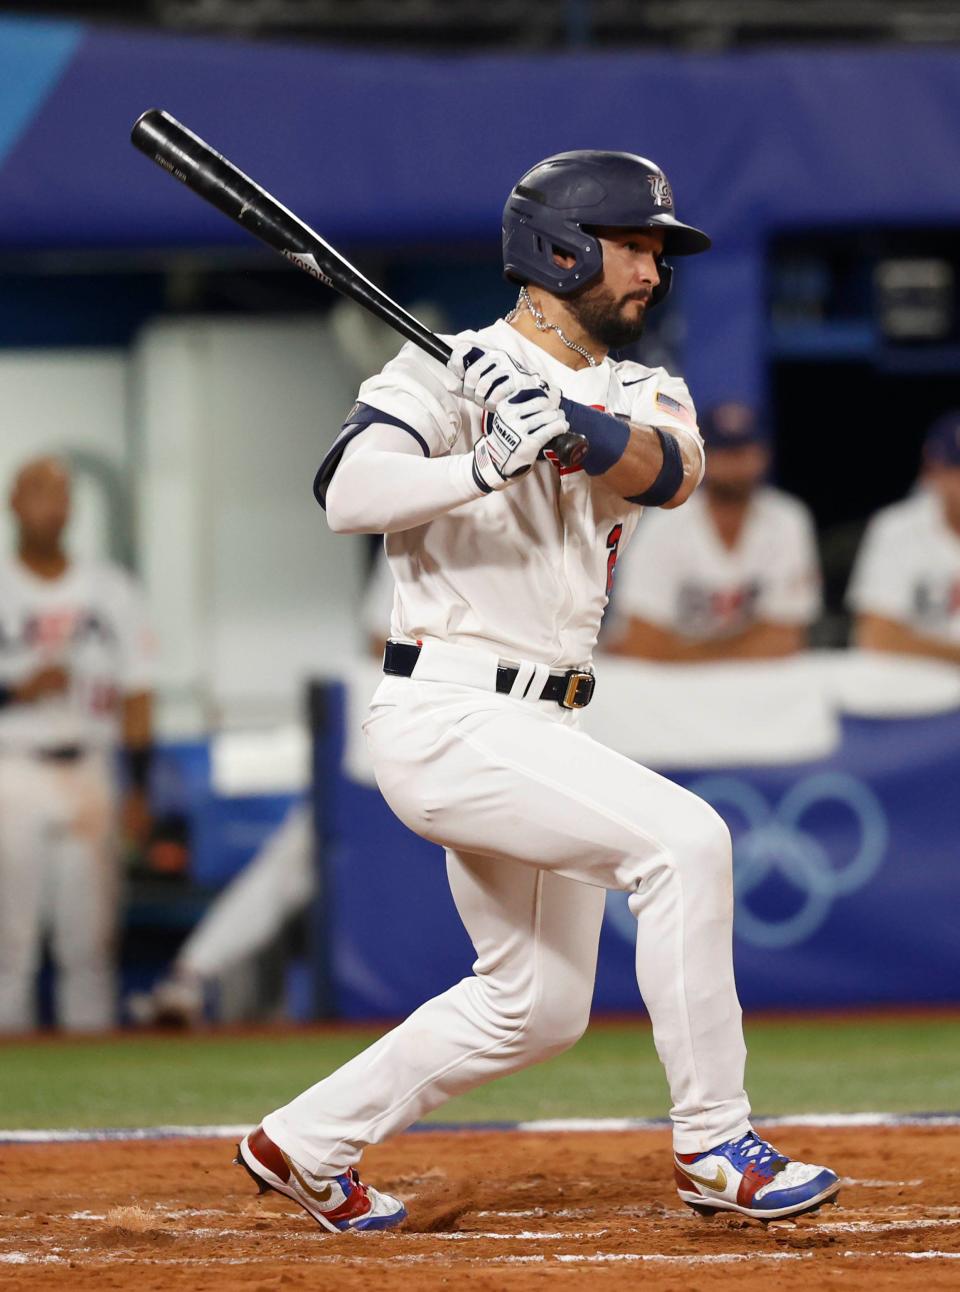 Team USA infielder Eddy Alvarez (2) drives in a run with a ground out against Korea during the sixth inning in a baseball semifinal match during the Tokyo 2020 Olympic Summer Games at Yokohama Baseball Stadium.